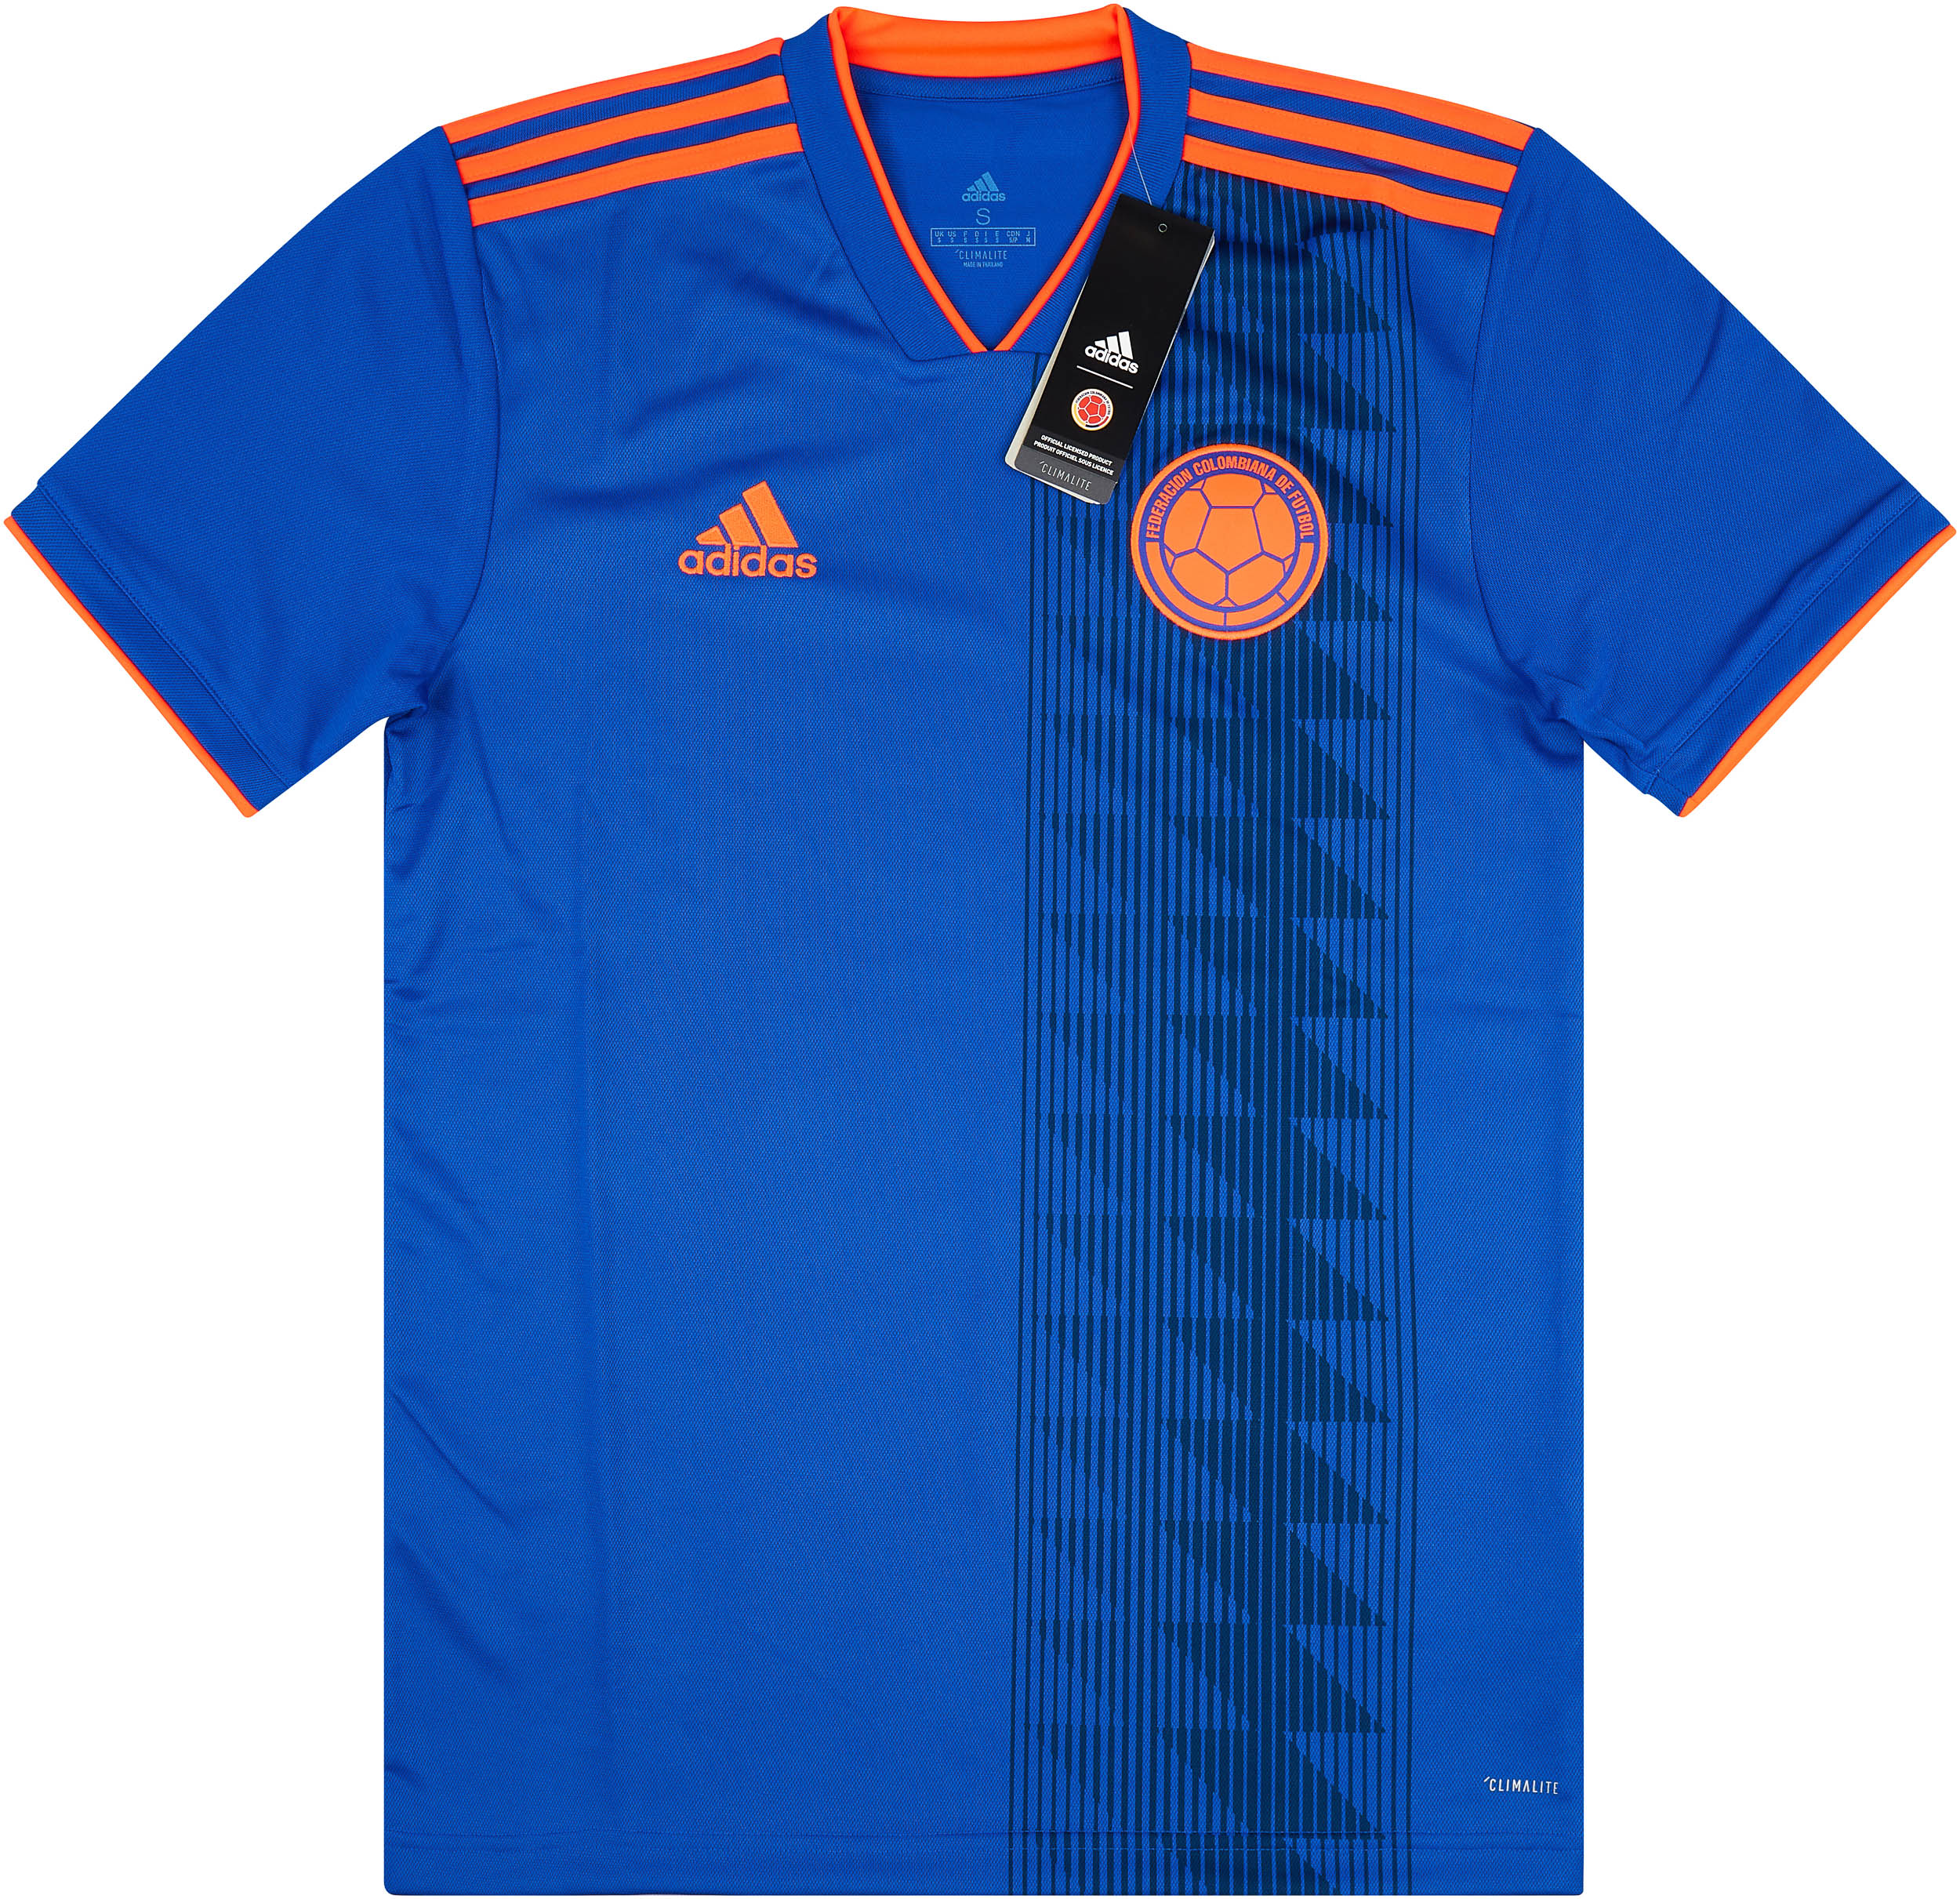 2018-19 Colombia Away Shirt ()